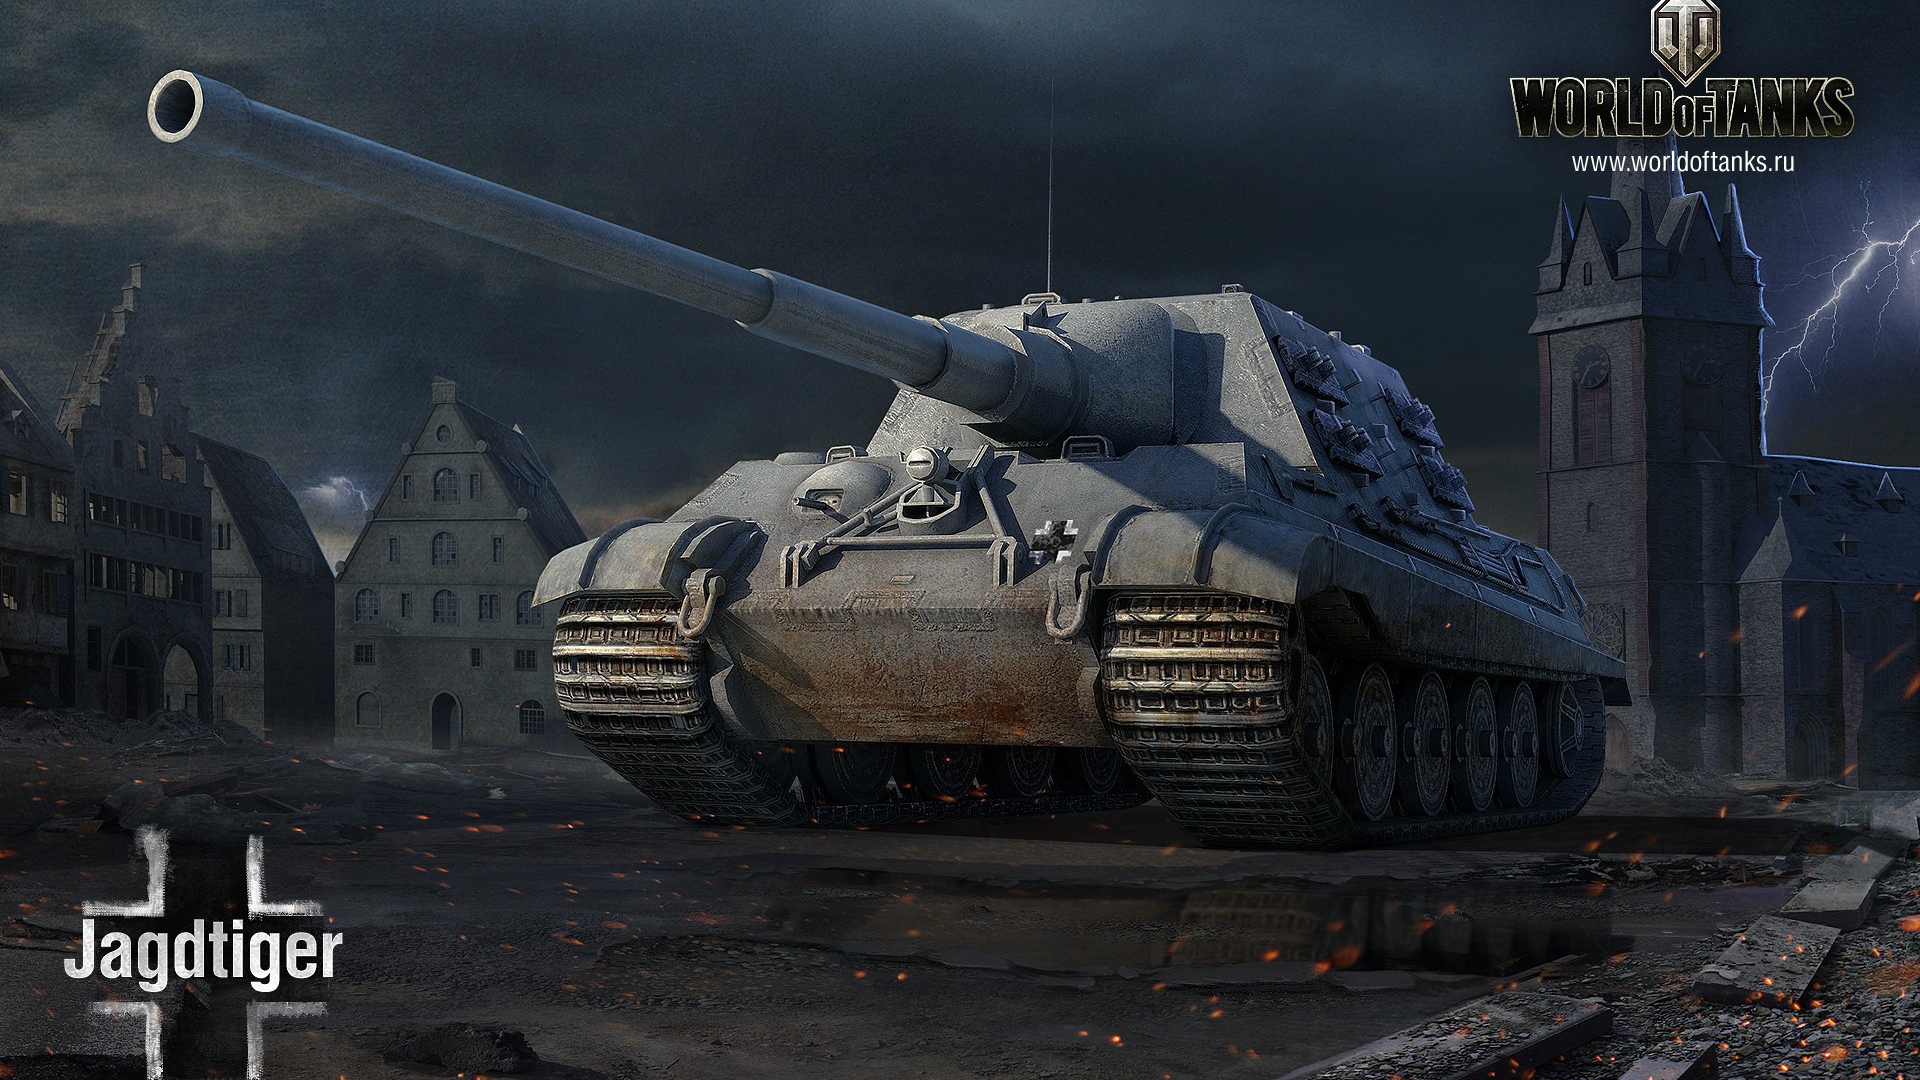 Powerful JagdTiger from the game World of Tanks